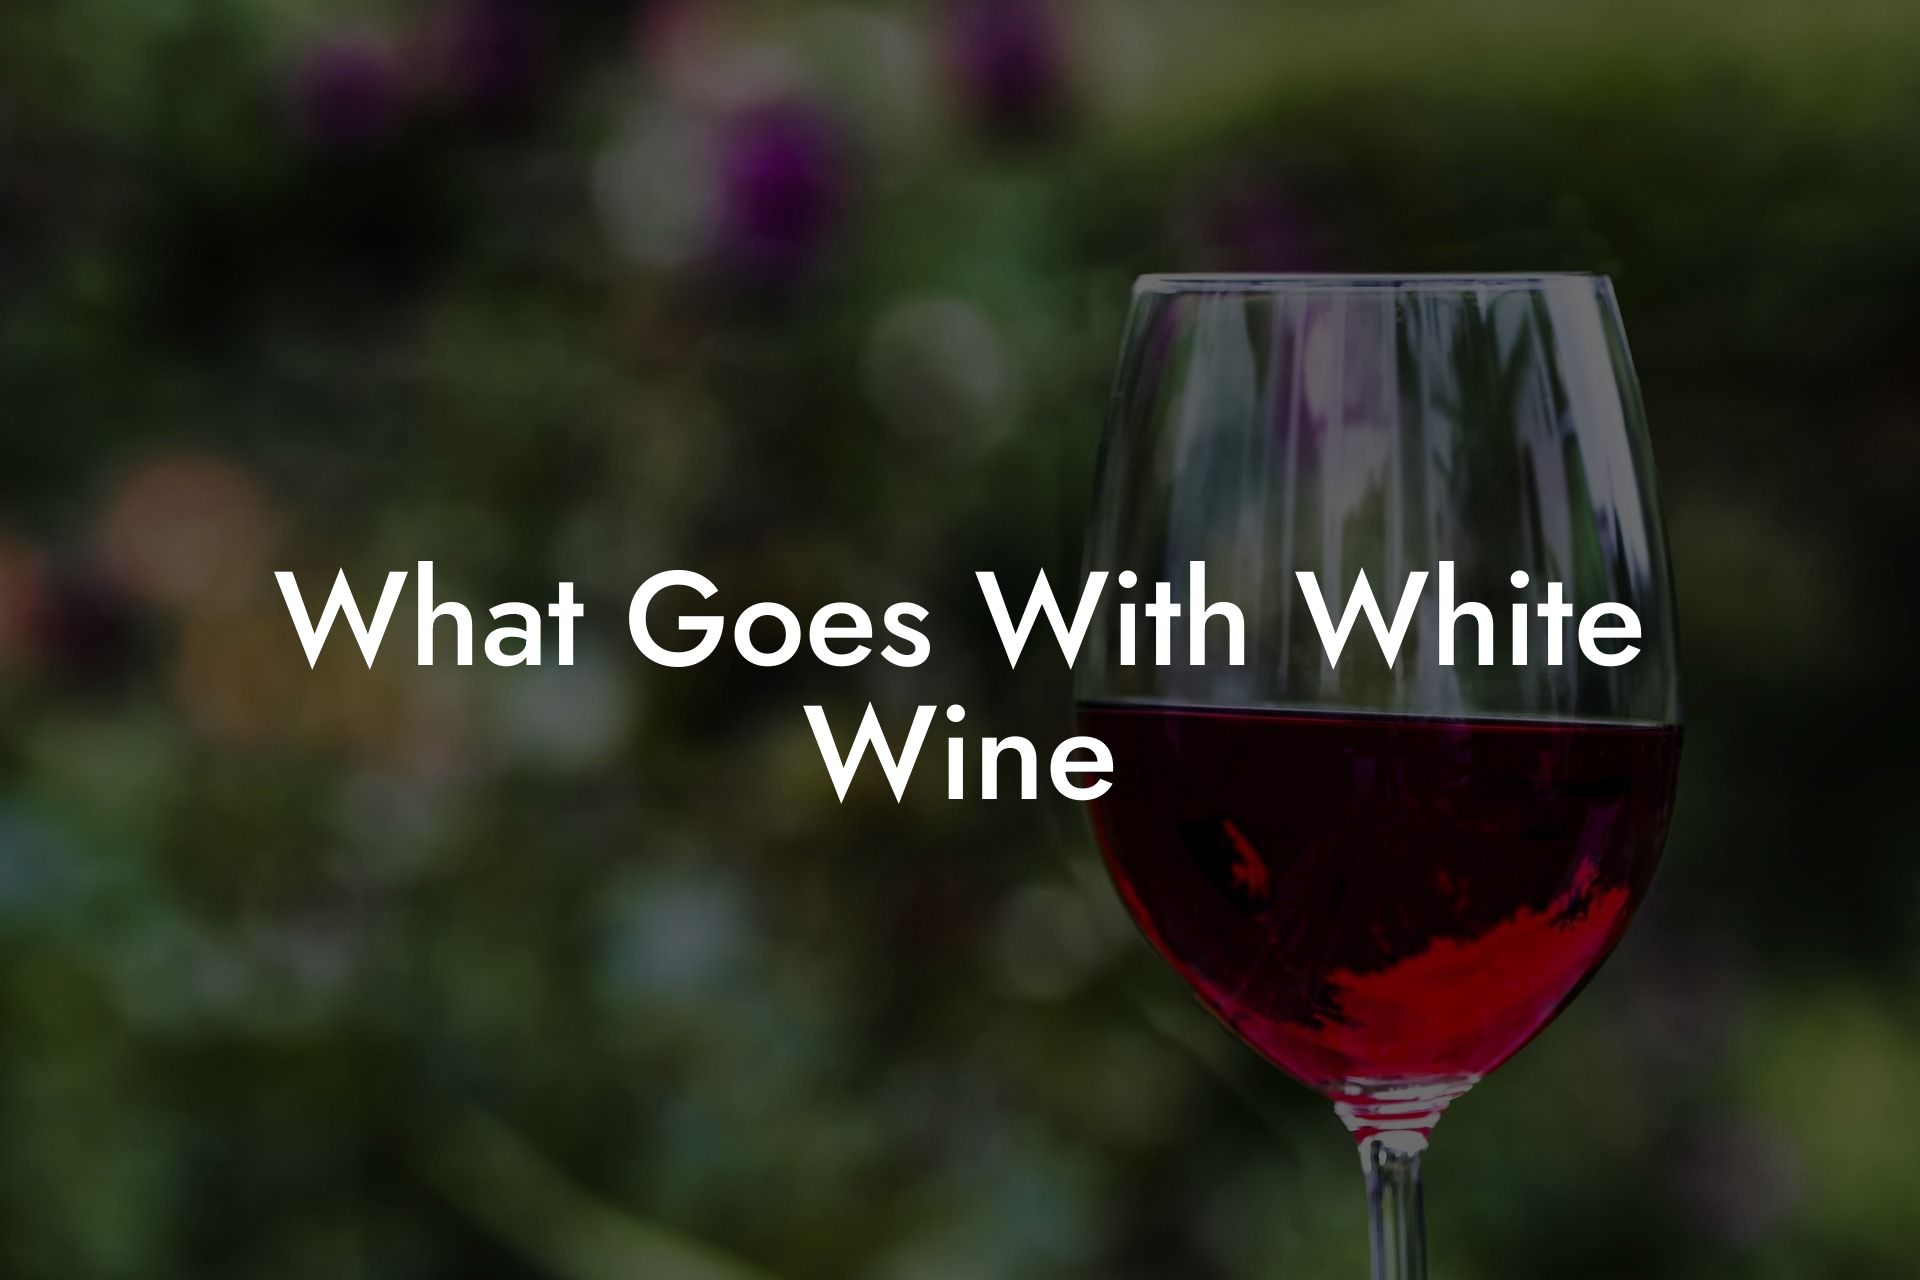 What Goes With White Wine